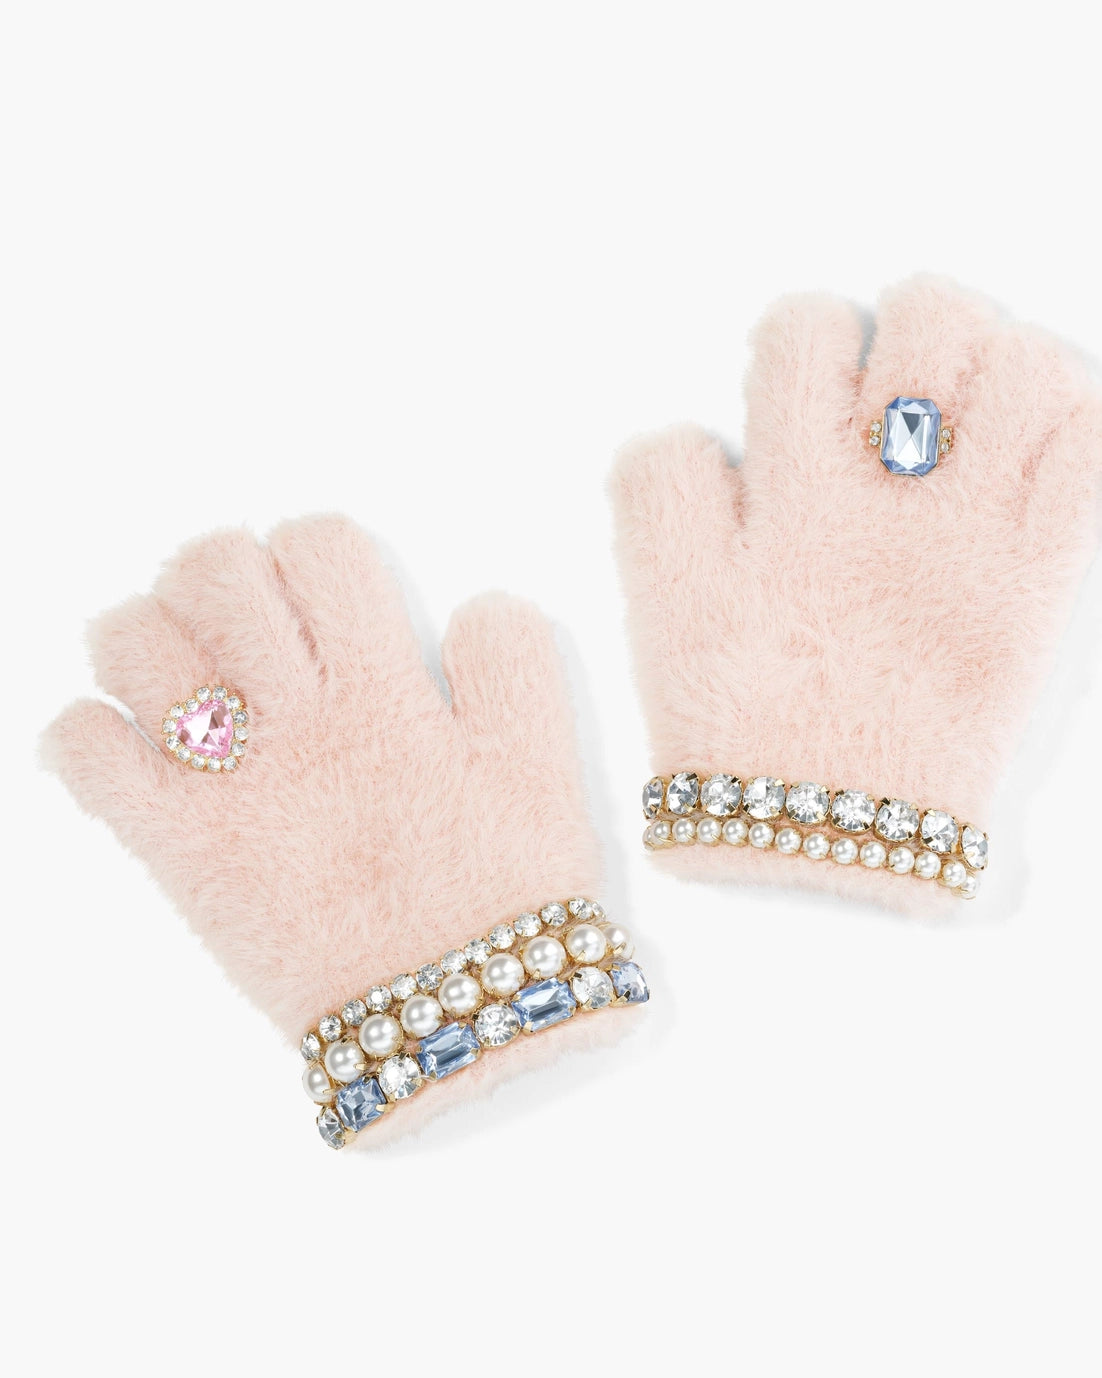 Keep your cutie's hands warm and their style on point with these pink Cotton Candy Jeweled Gloves! Adorned with gem and pearl beads to look like rings and bracelets, these super soft gloves provide a stretchy, cozy fit so kids can keep up their glam game all winter long. A must-have accessory - perfect for ages 4 through 10!